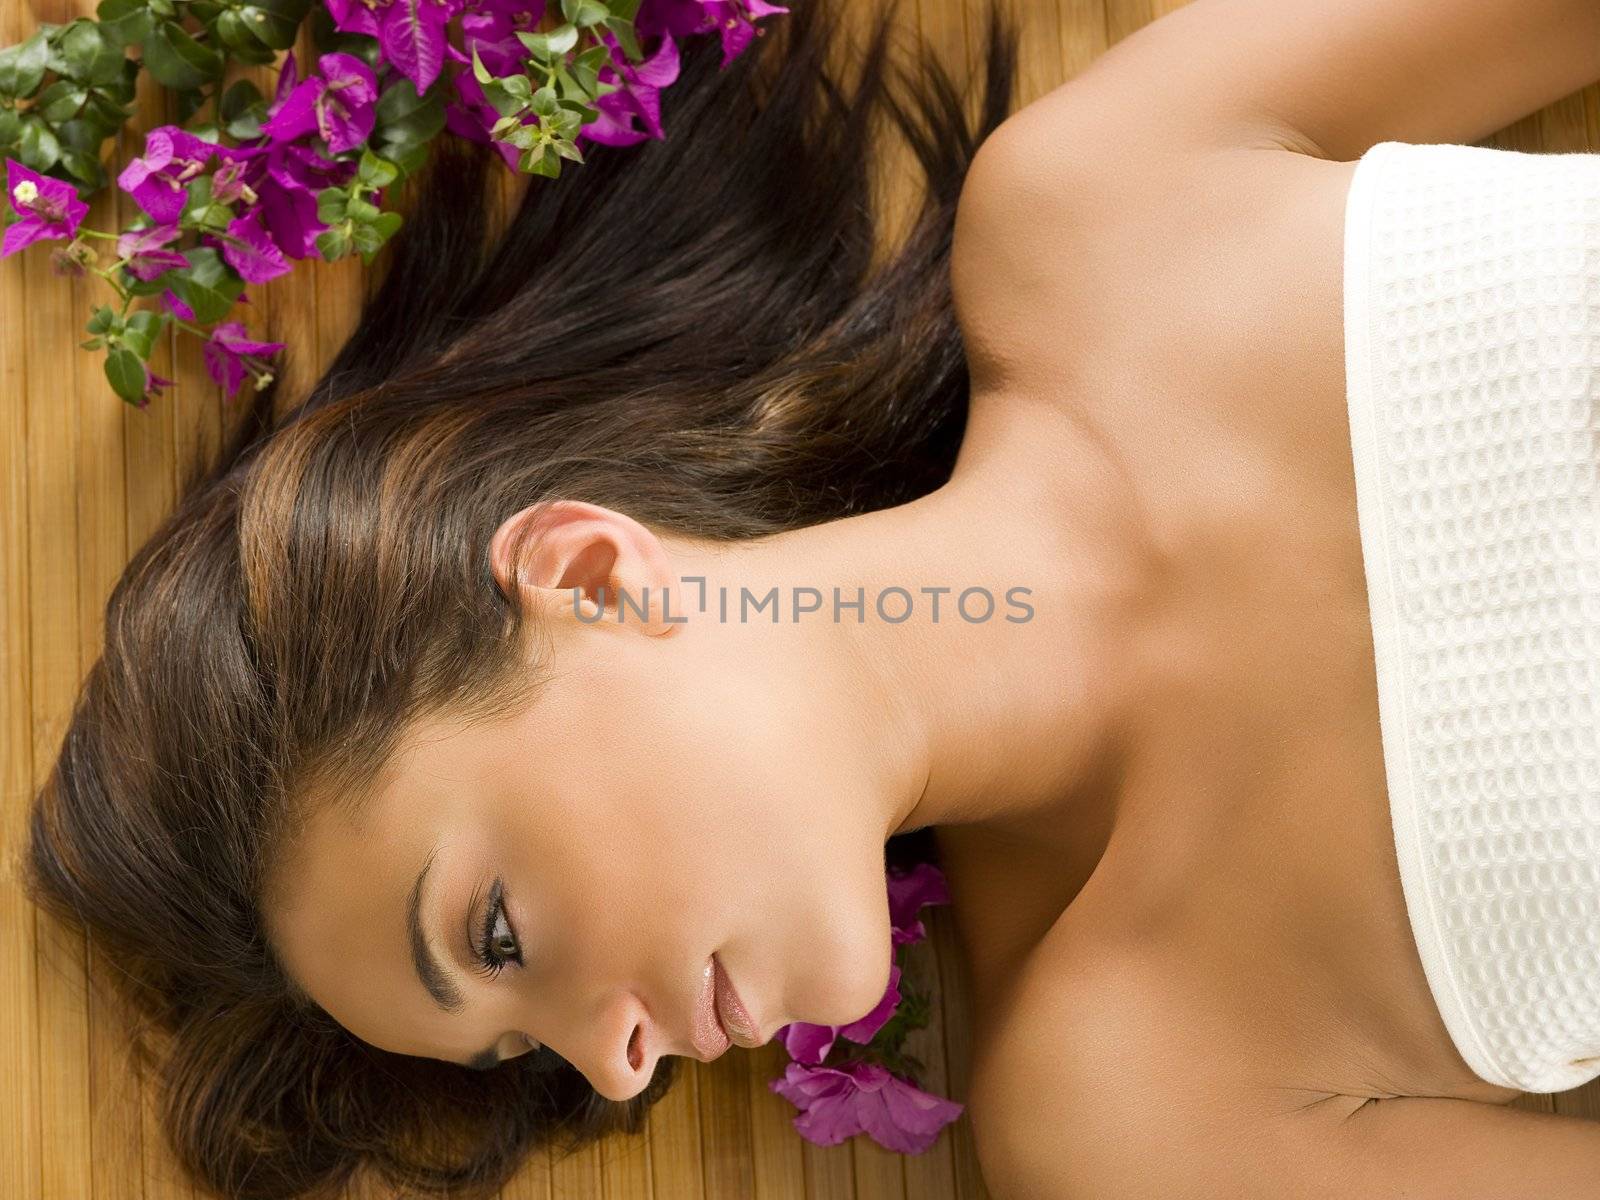 portrait of a beautiful brunette laying down on a wood carpet